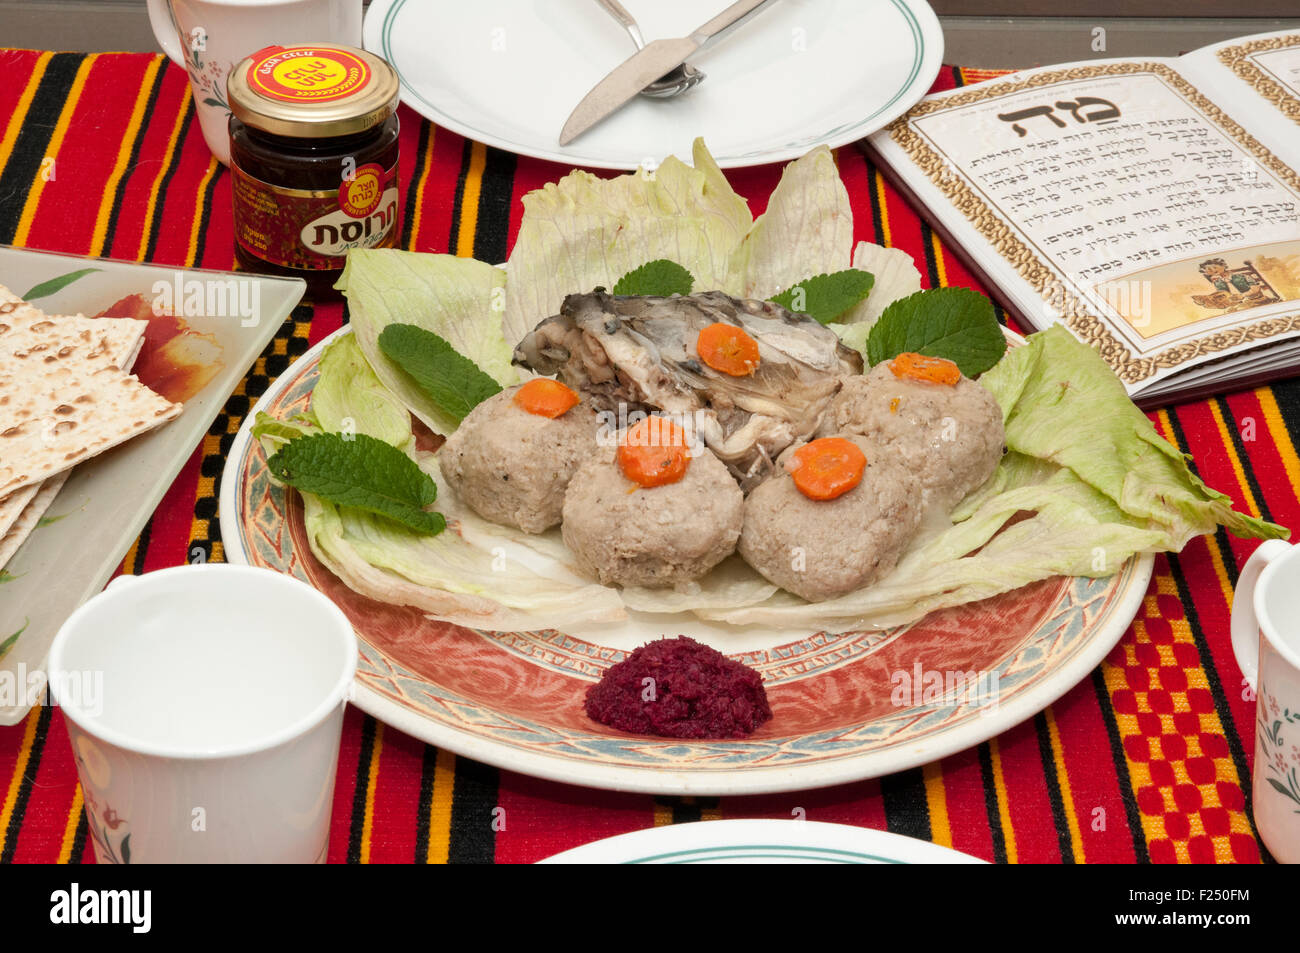 Gefilte fish with carrot. A traditional Askenazi Jewish festive dish of poached fish patties made from a mixture of ground debon Stock Photo